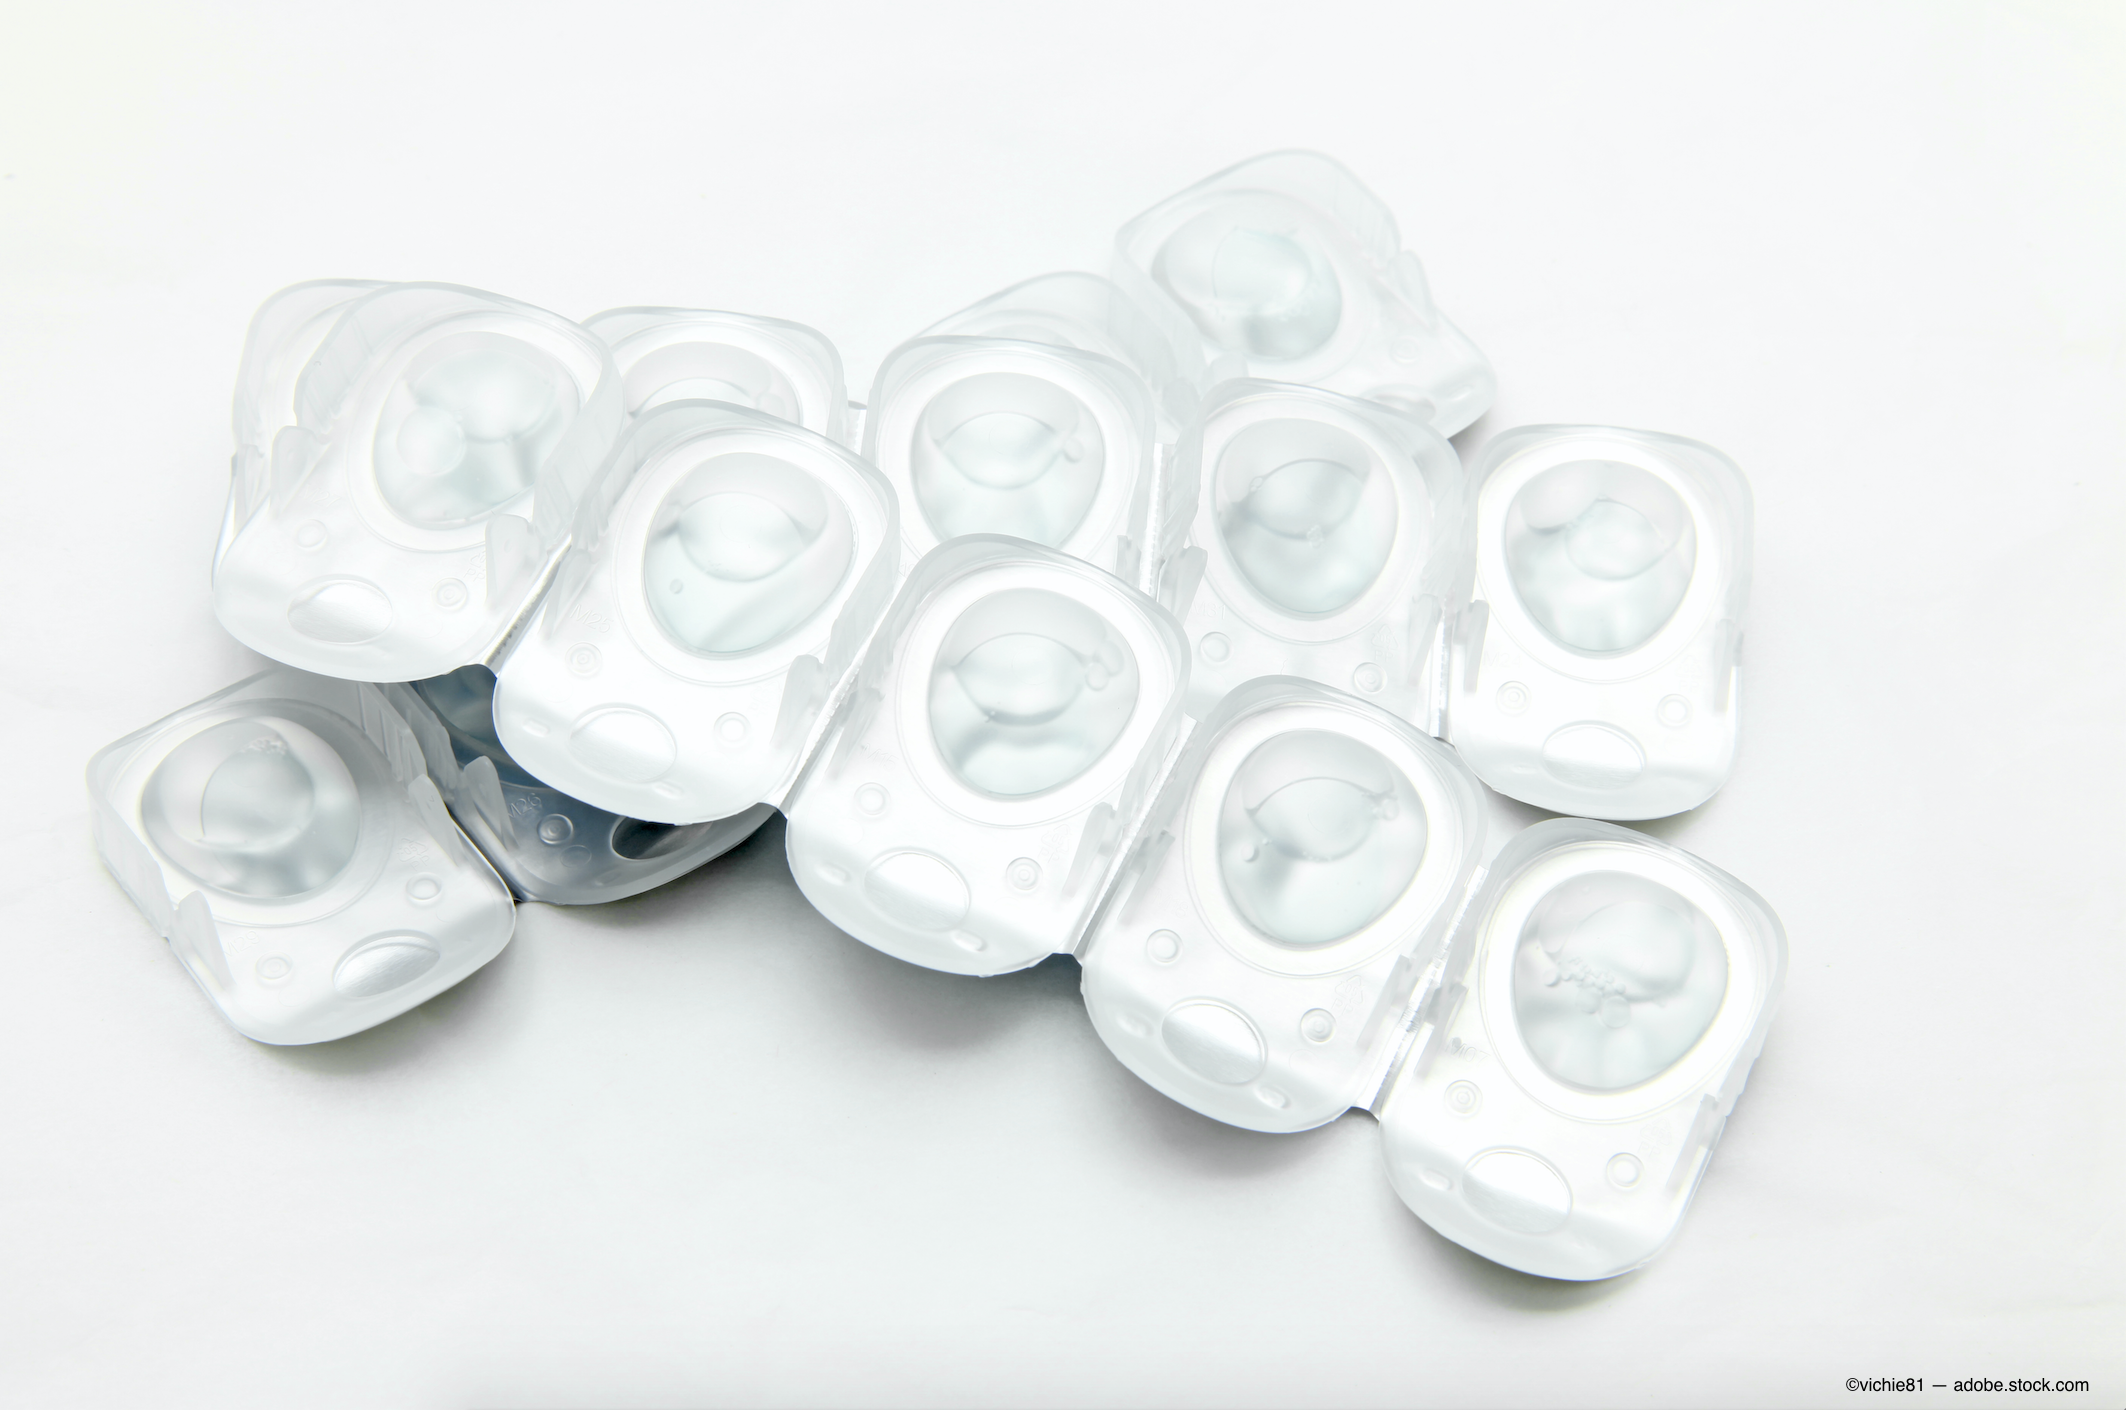 Sizing up daily disposable contact lenses